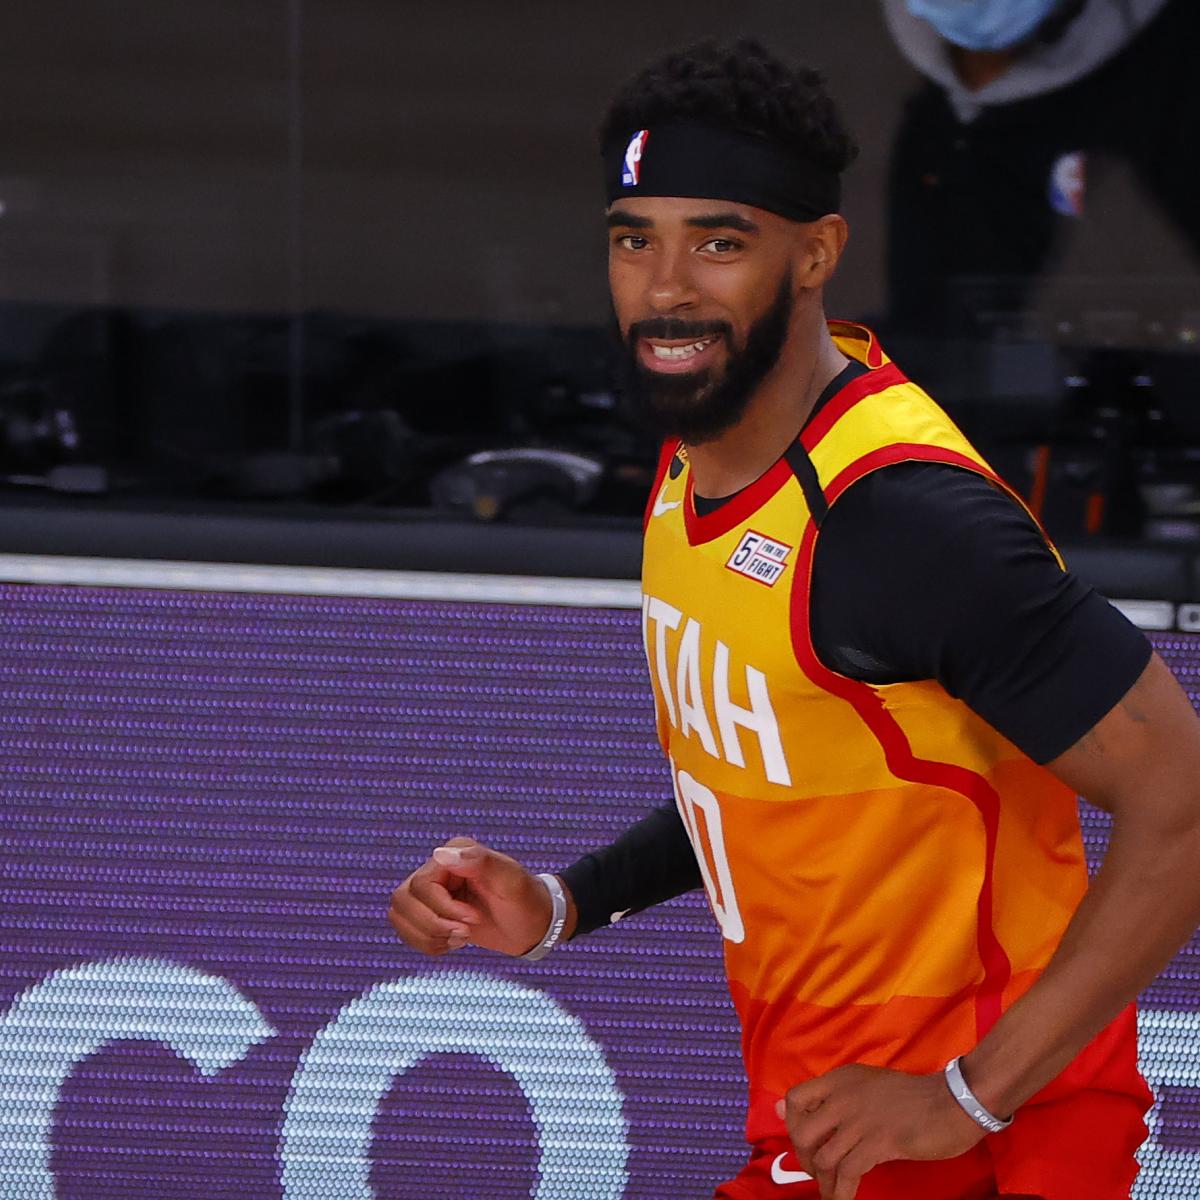 Utah Jazz point guard Mike Conley leaves Orlando for birth of son